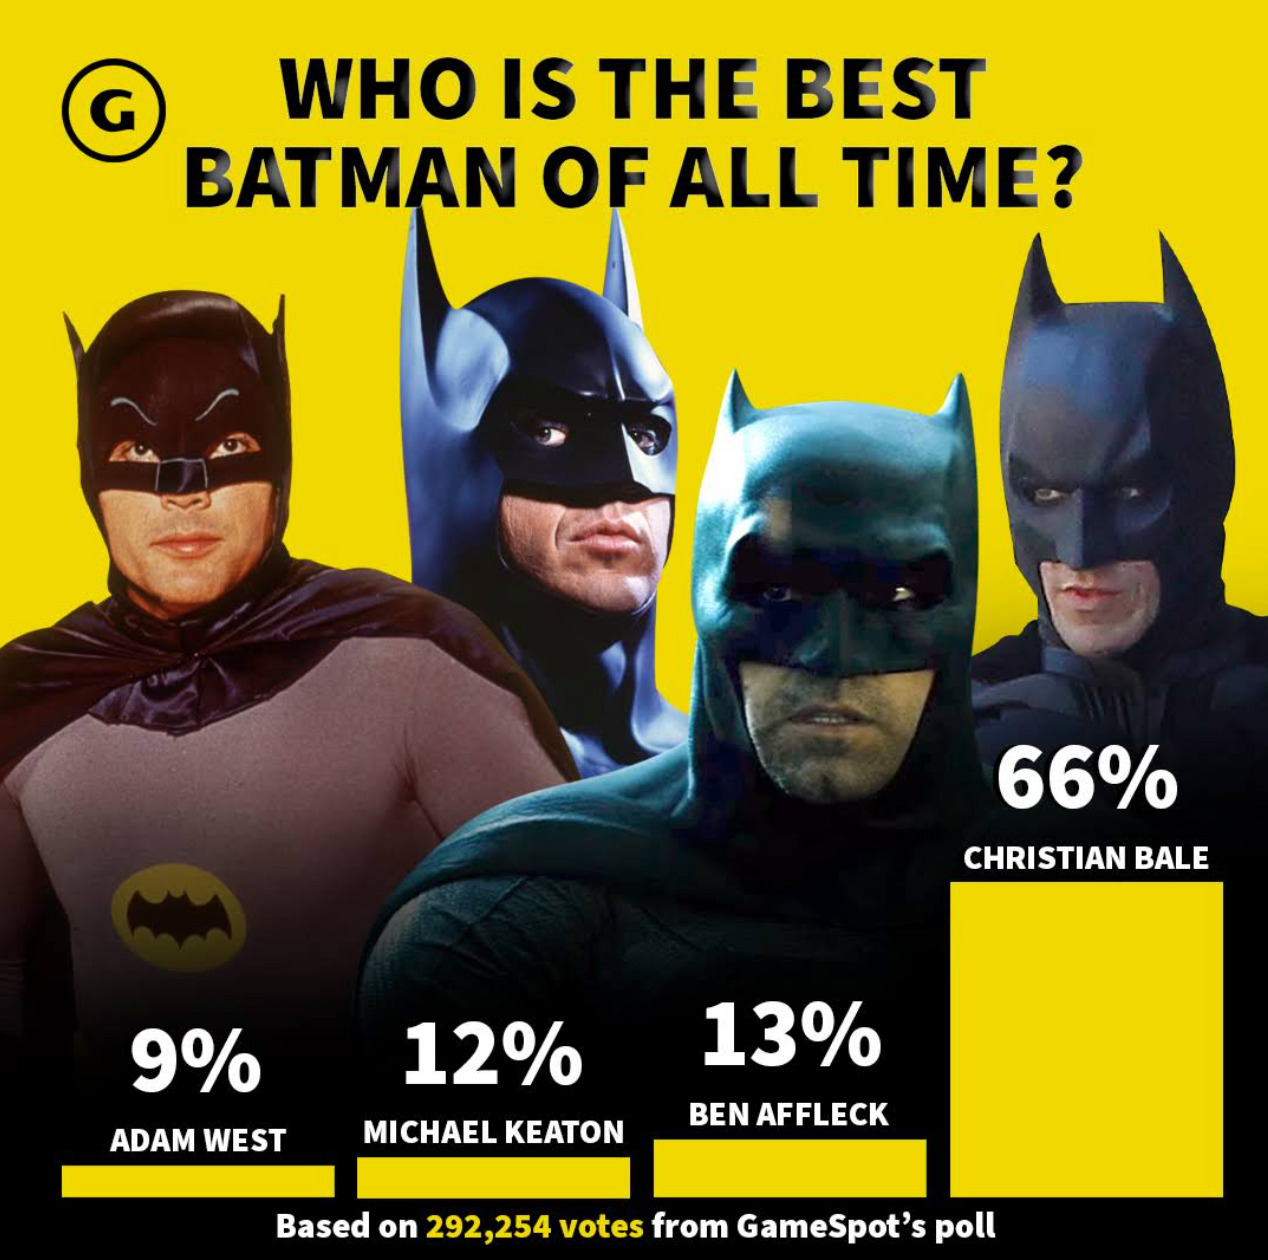 Who is the best Batman?